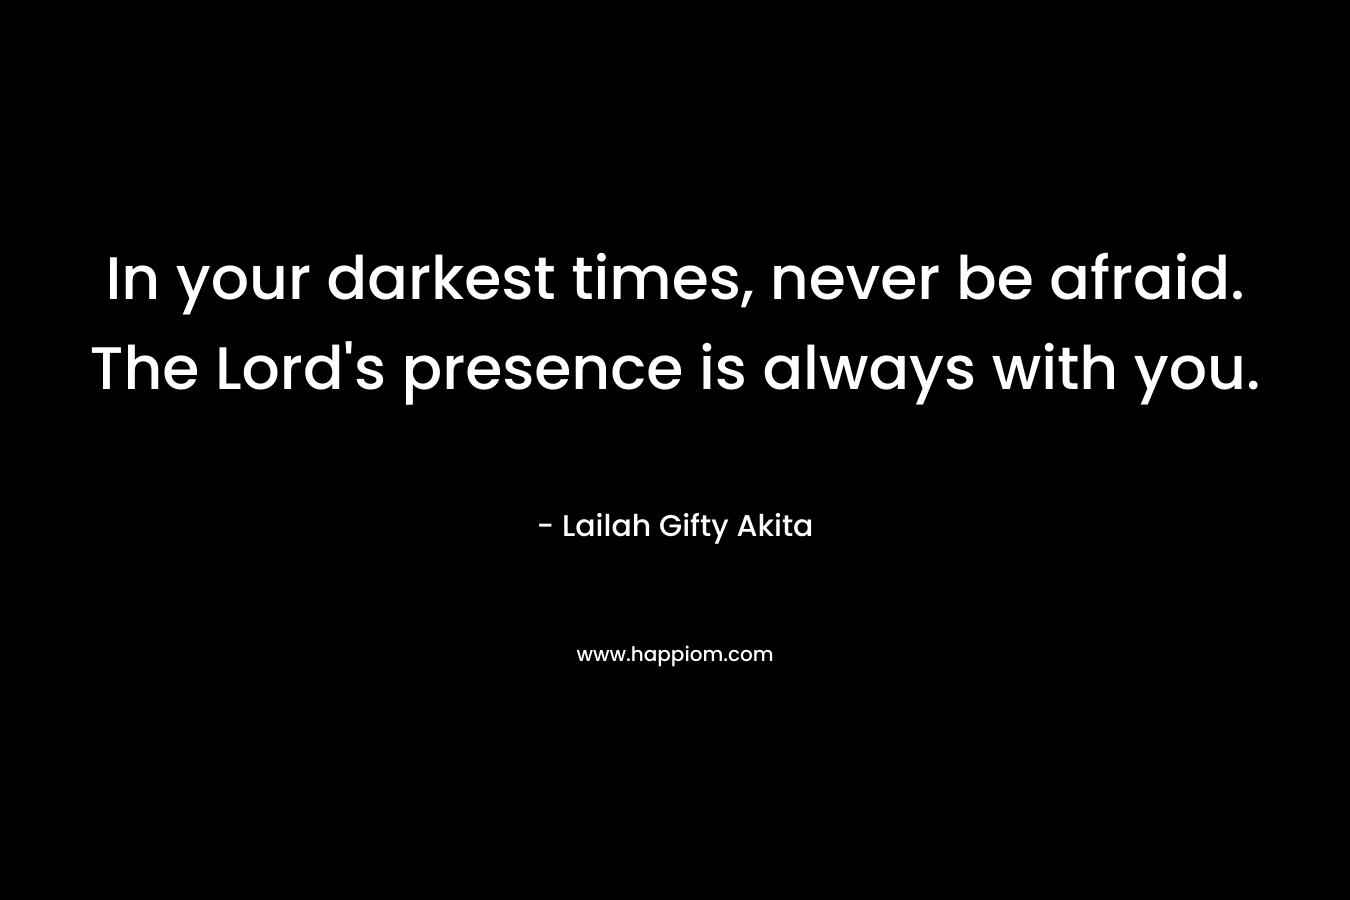 In your darkest times, never be afraid. The Lord's presence is always with you.